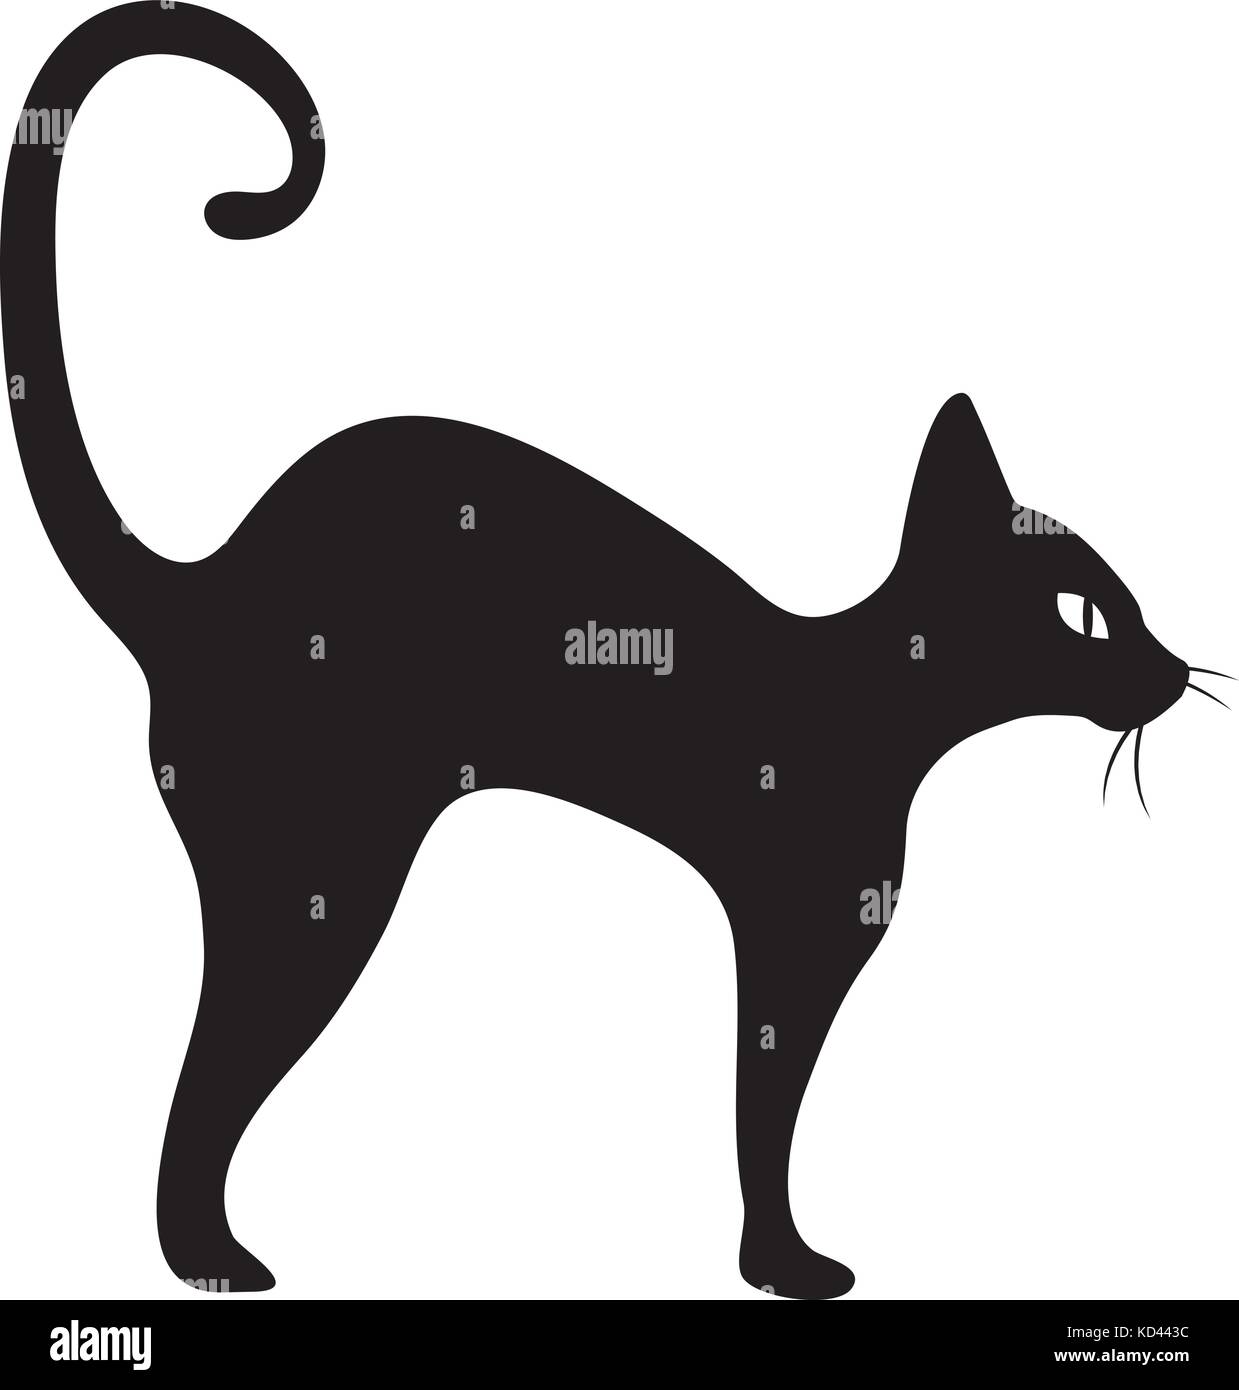 Black cat icon flat style. Isolated on white background. Vector illustration. Stock Vector